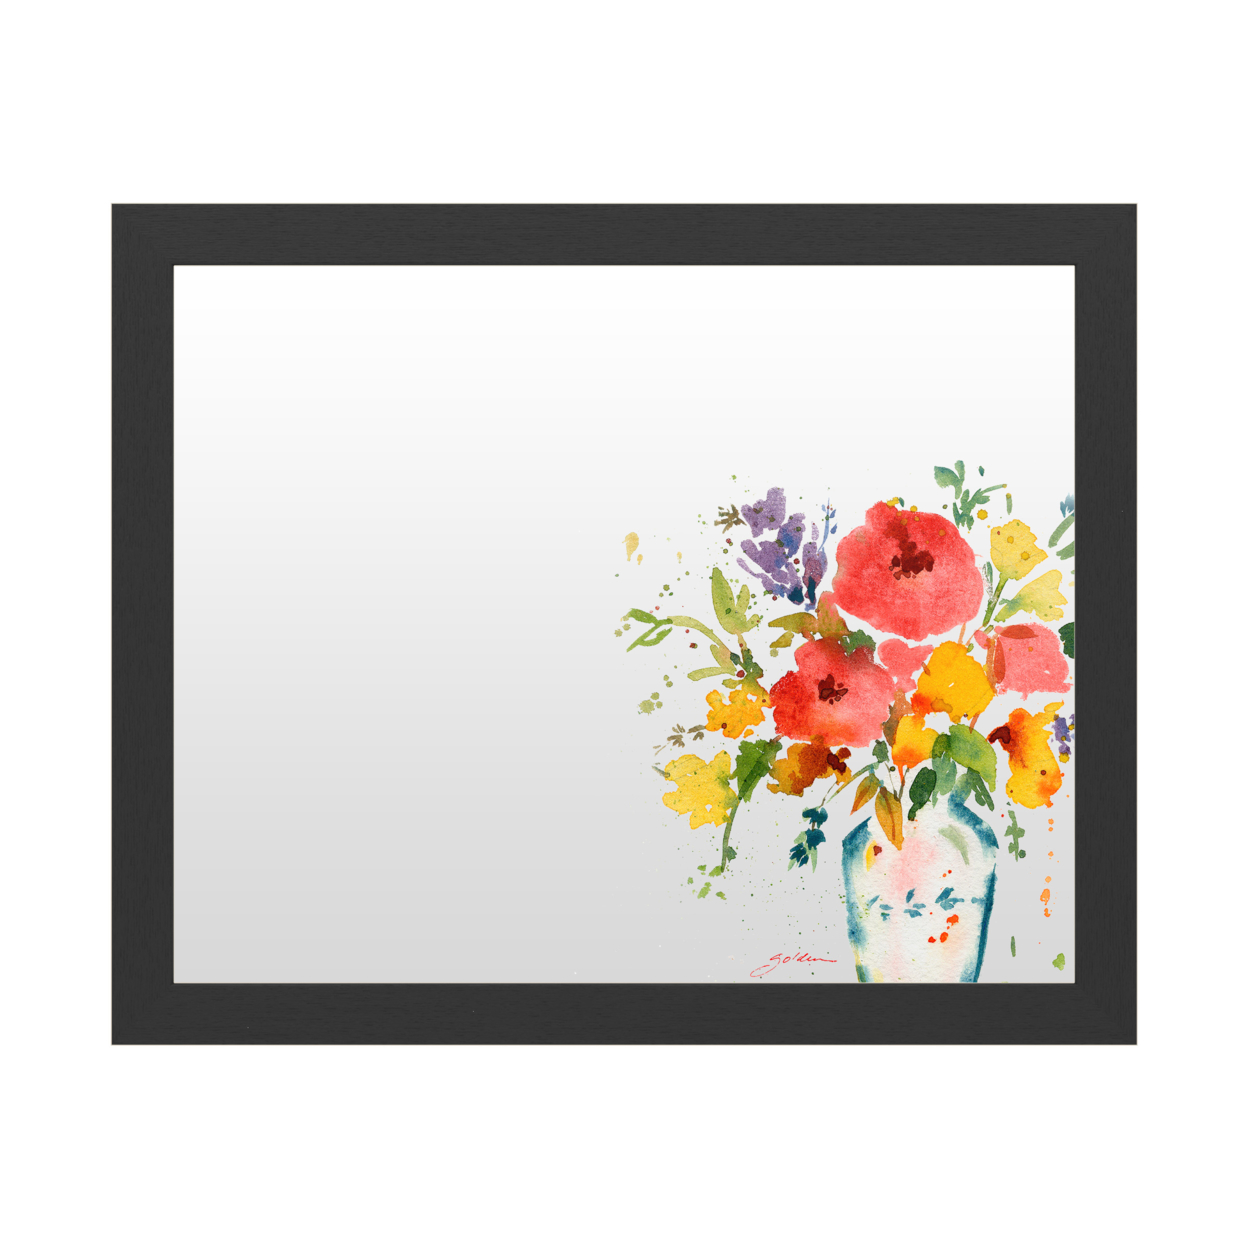 Dry Erase 16 X 20 Marker Board With Printed Artwork - Sheila Golden White Vase With Bright Flowers White Board - Ready To Hang